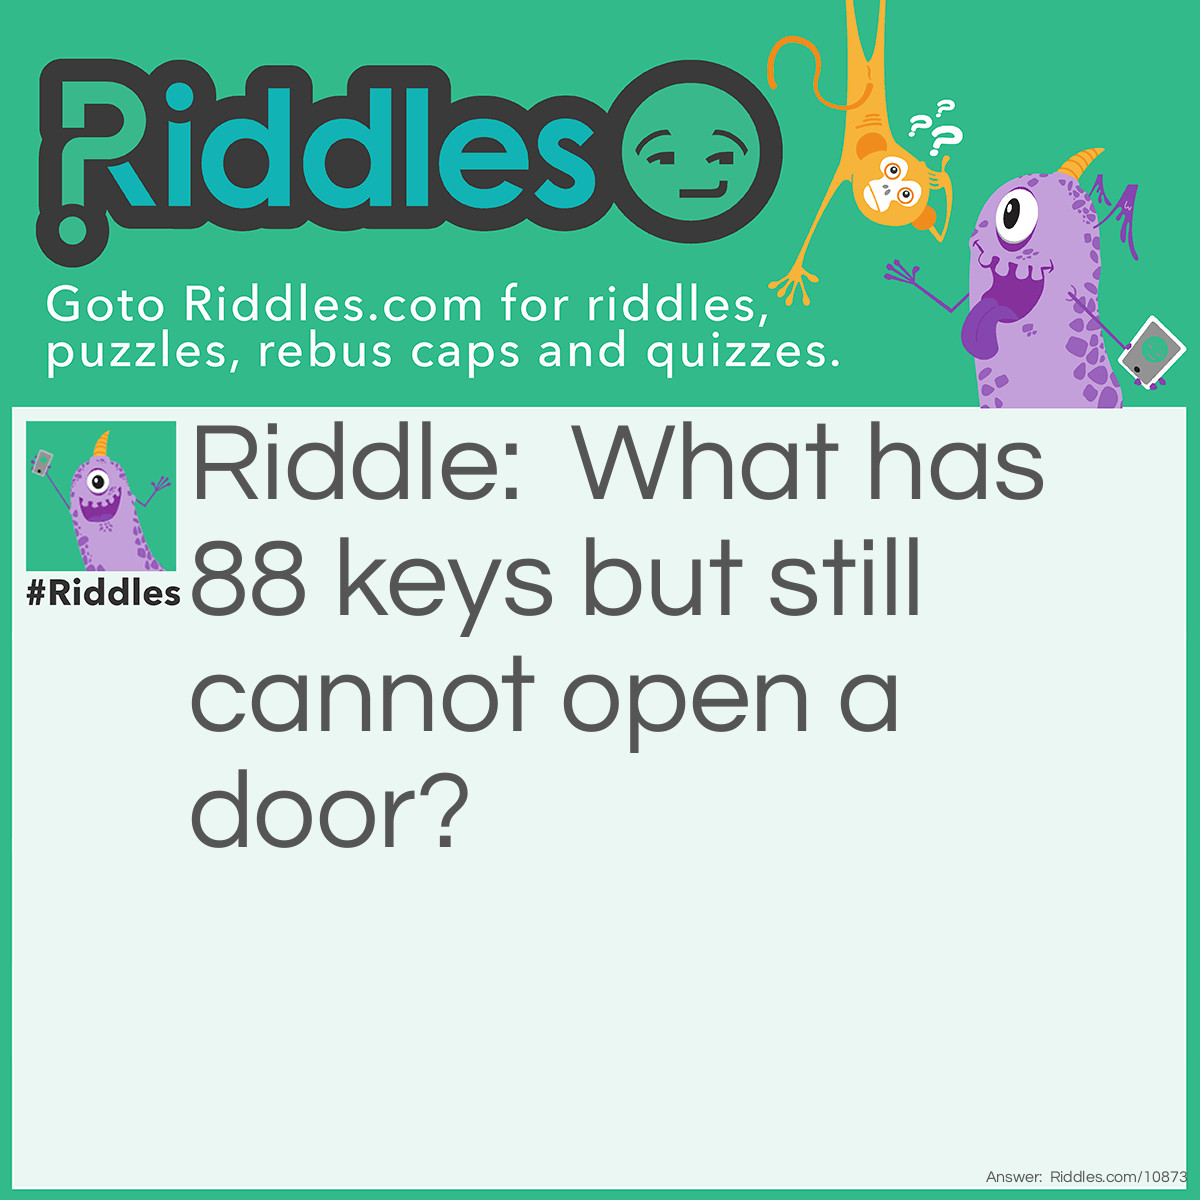 Riddle: What has 88 keys but still cannot open a door? Answer: A piano.